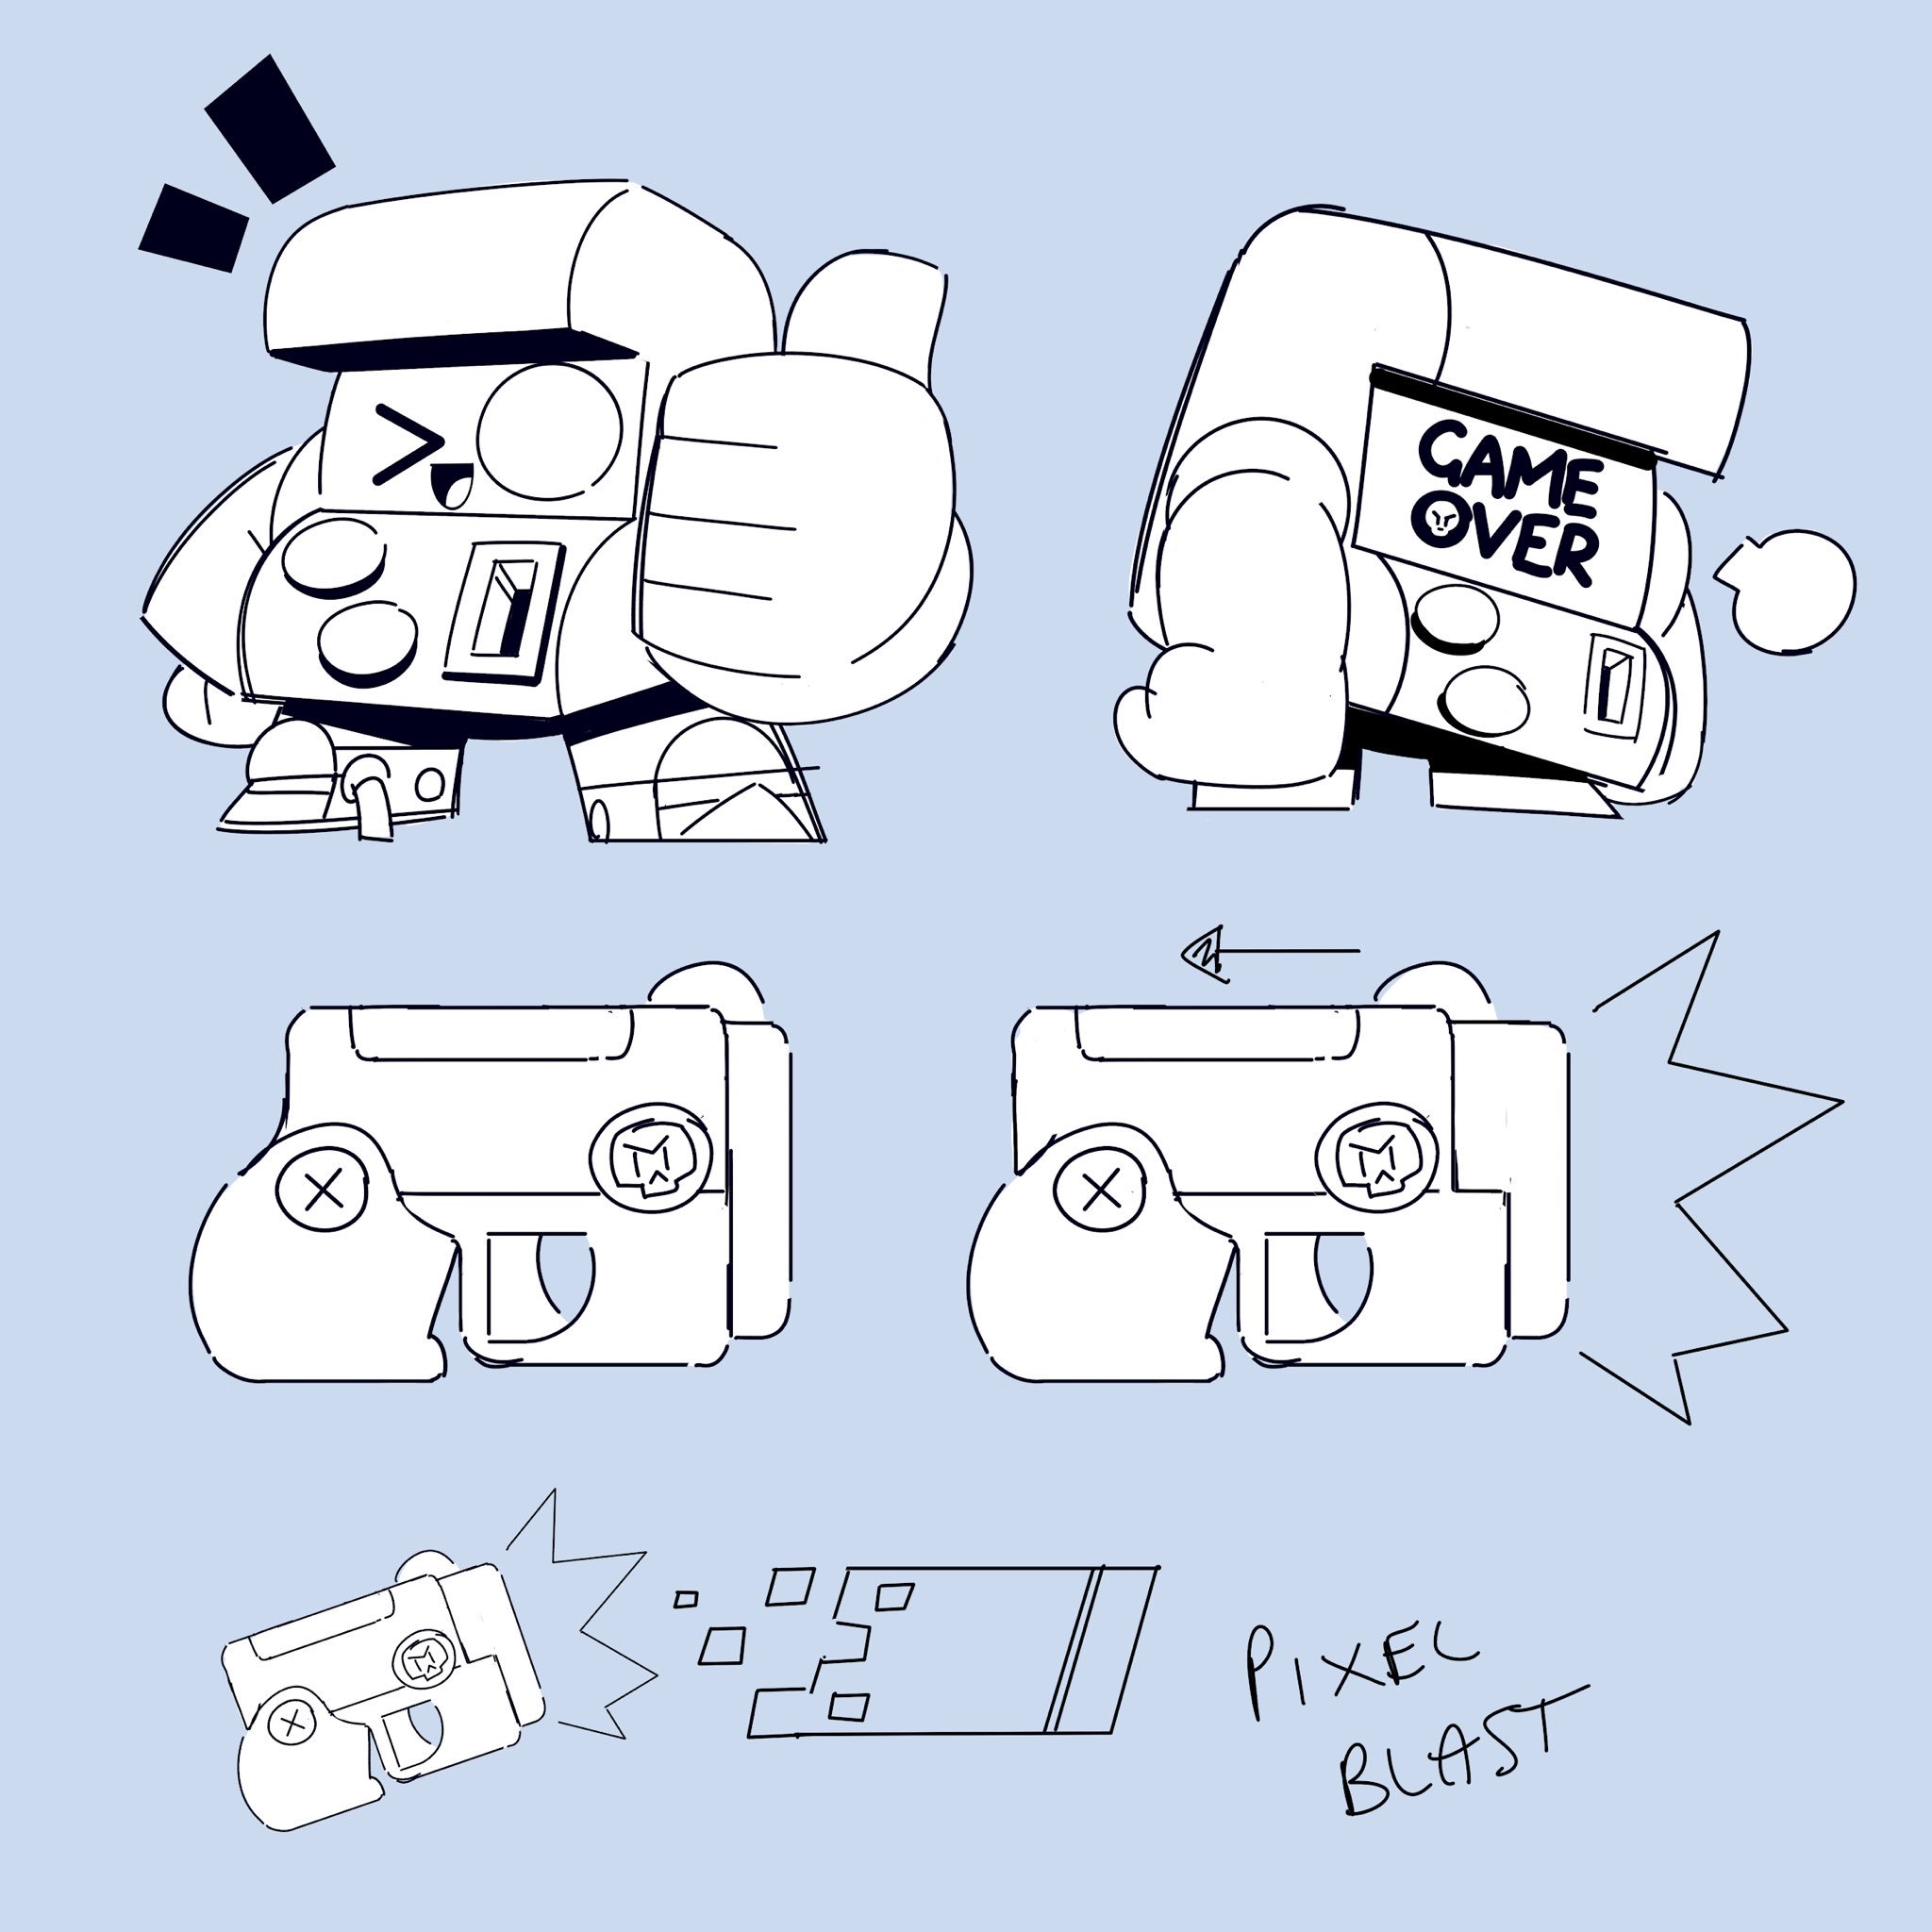 Paul On Twitter It S Been A While Here Are The Concepts For Our New Brawler 8 Bit He S A Grumpy Arcade Machine Don T Push His Buttons Brawlstars Conceptart Characterdesign Https T Co Ynggxw5u5h - dessin arkad brawl stars